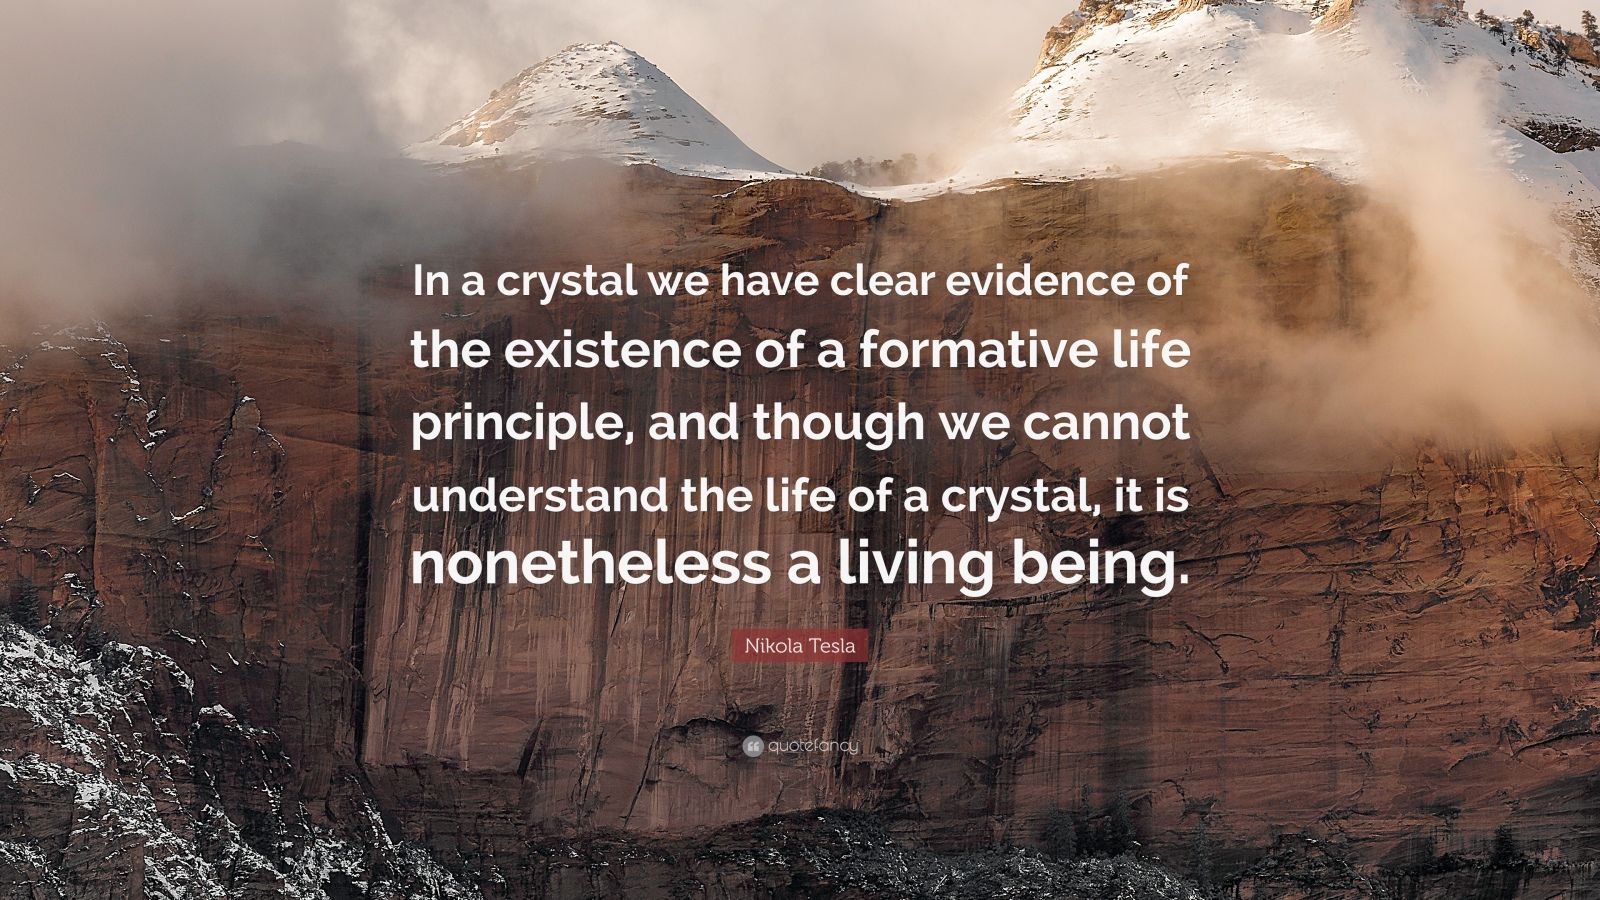 Nikola Tesla Quote: “In a crystal we have clear evidence of the